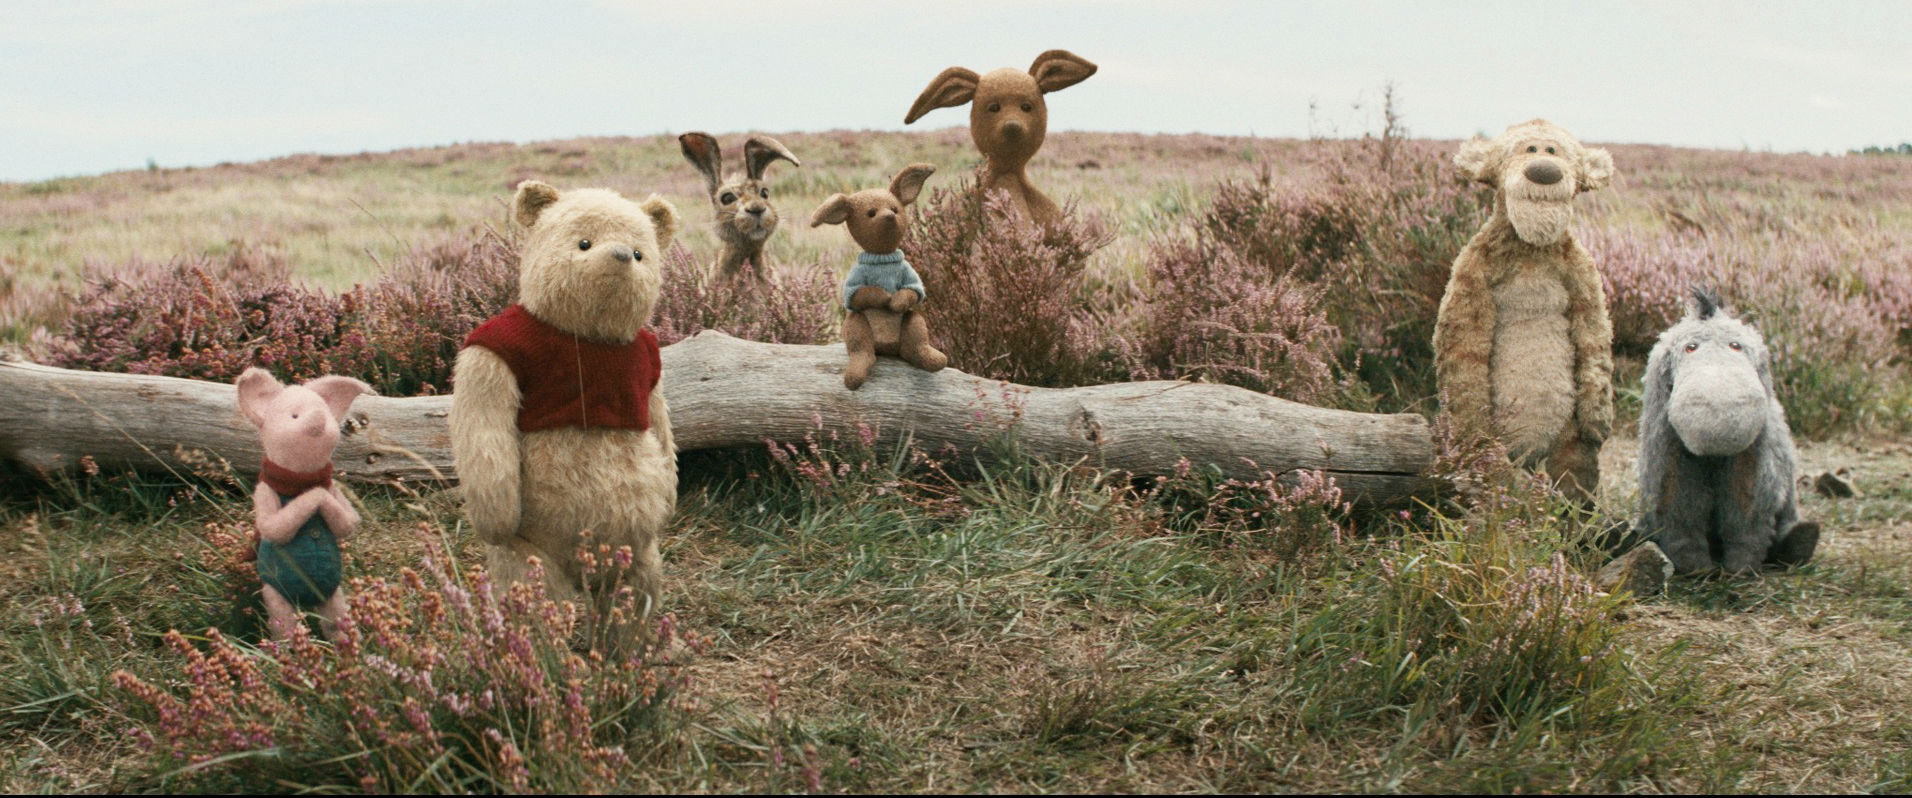 Christopher Robin Is Incredibly Dreary For What Should Be A Happy Trip Down Memory Lane